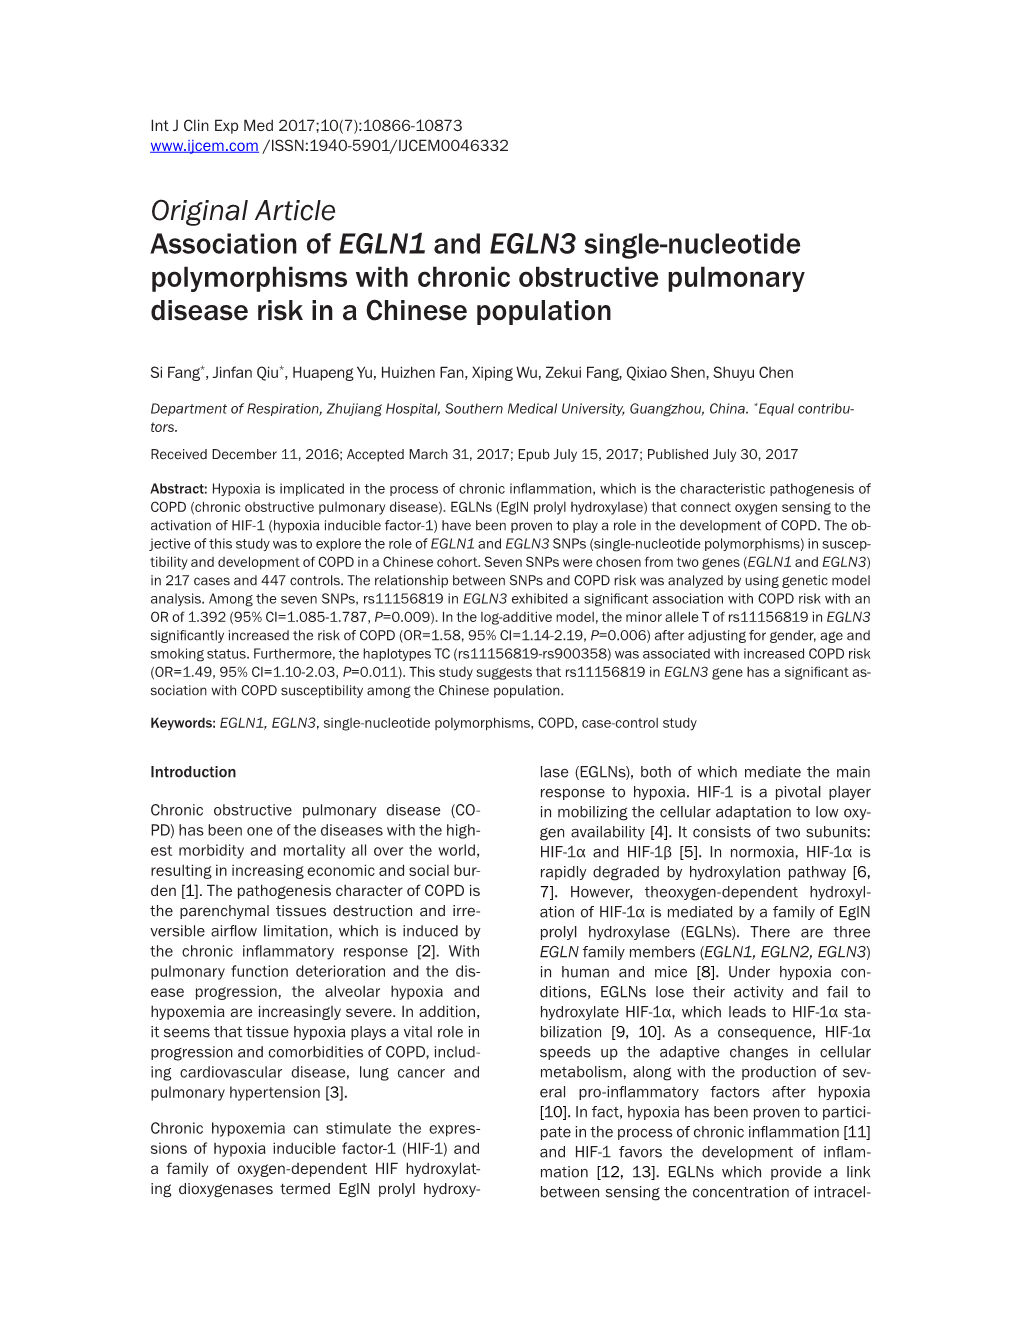 Original Article Association of EGLN1 and EGLN3 Single-Nucleotide Polymorphisms with Chronic Obstructive Pulmonary Disease Risk in a Chinese Population